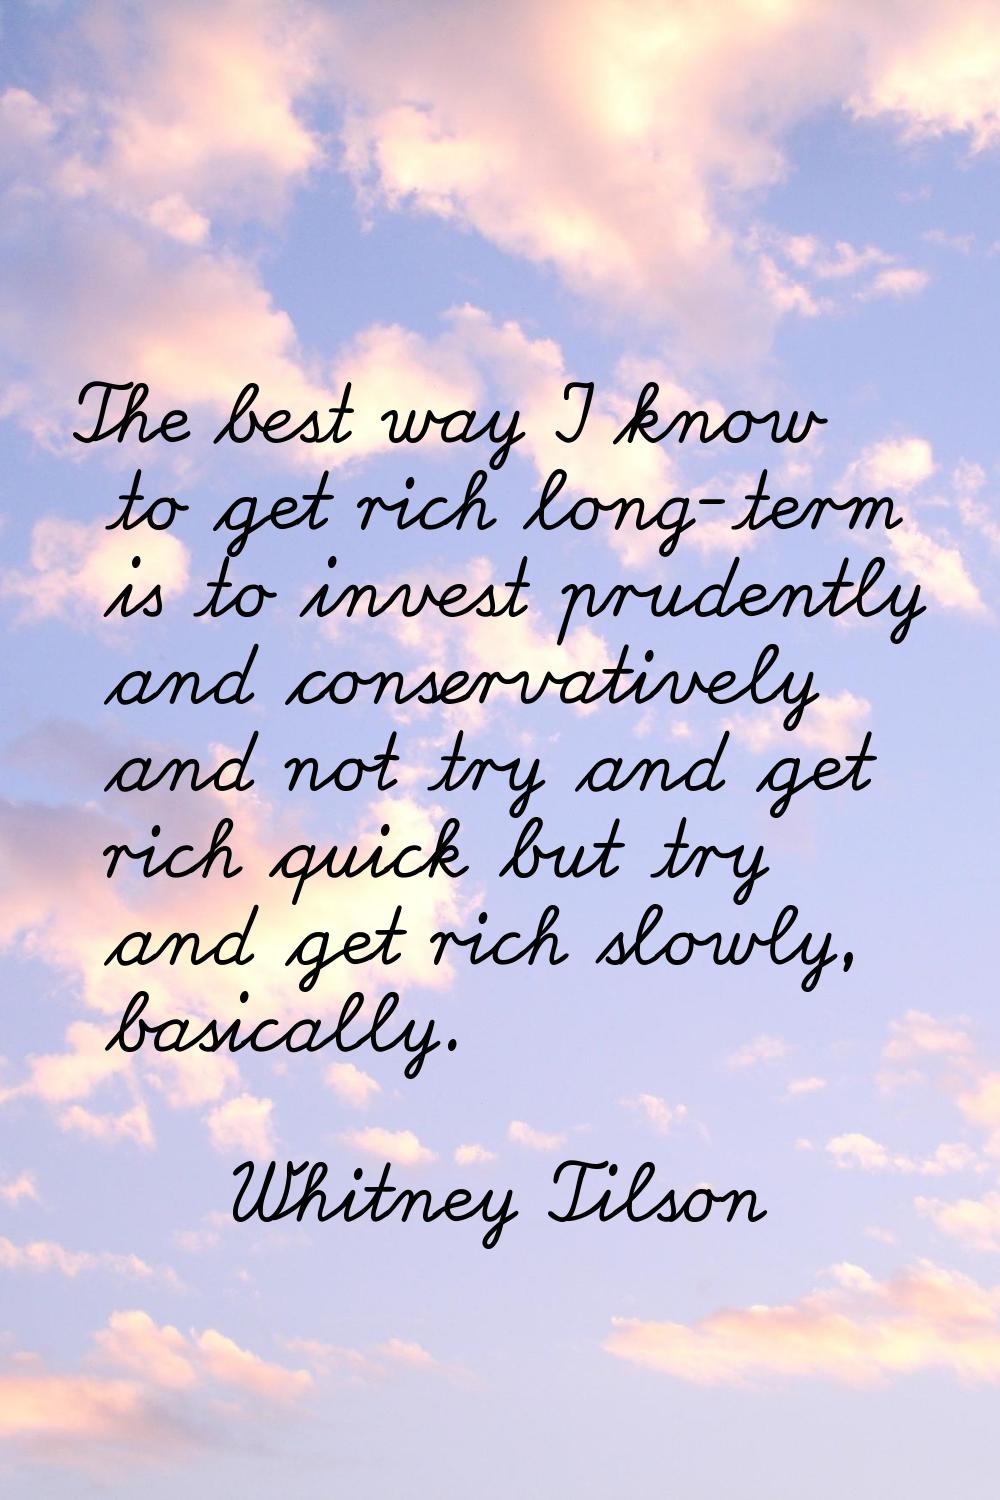 The best way I know to get rich long-term is to invest prudently and conservatively and not try and